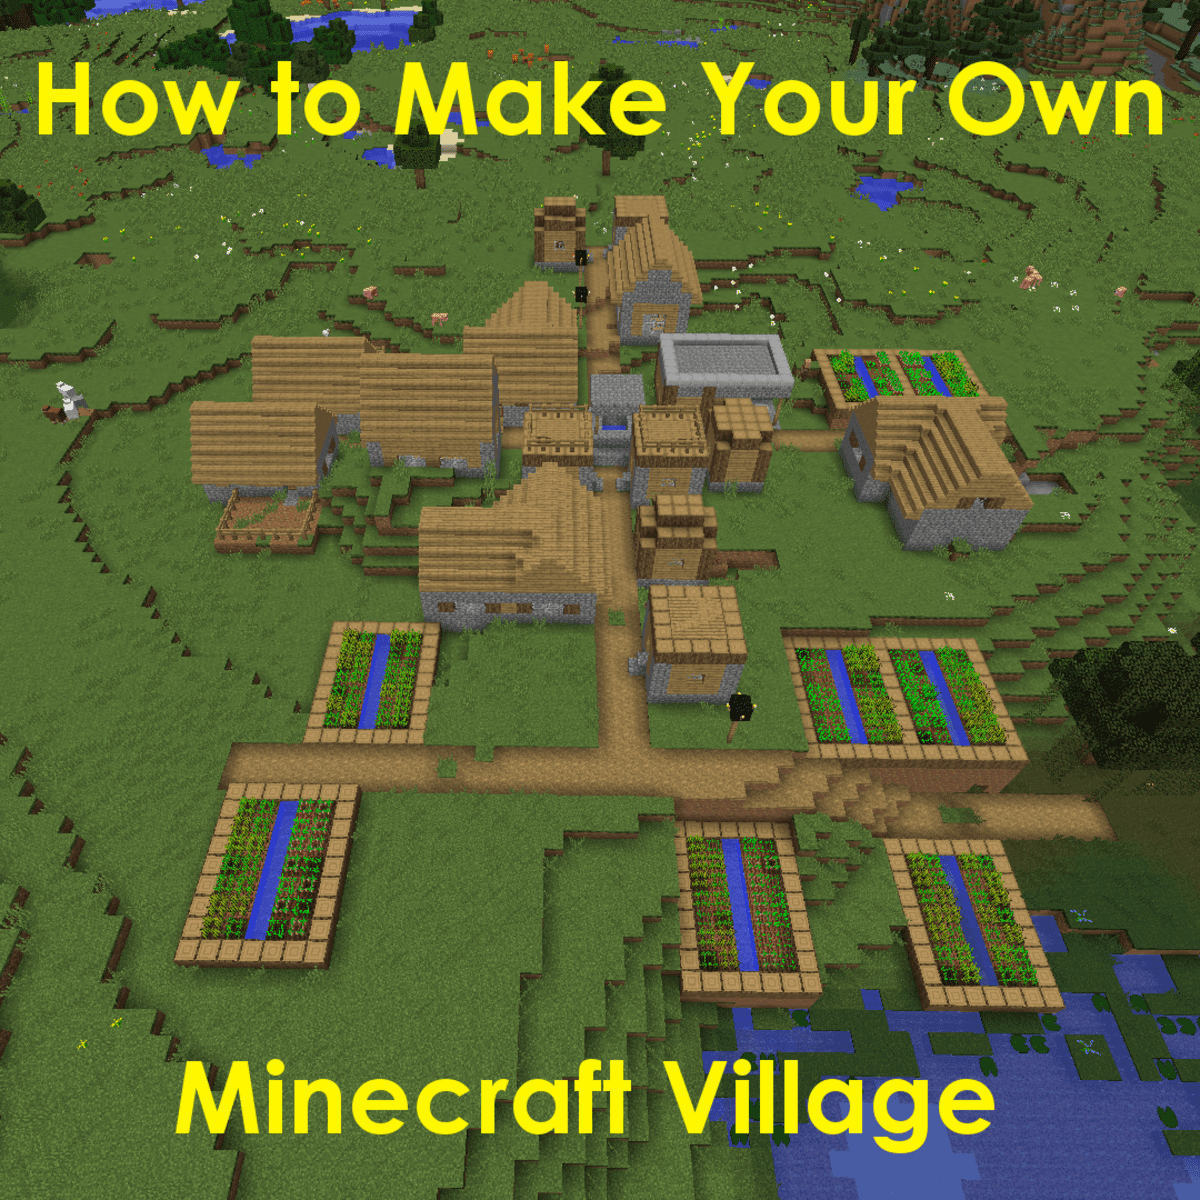 How To Make A Villager Farmer 1 16 - Farmer Foto Collections